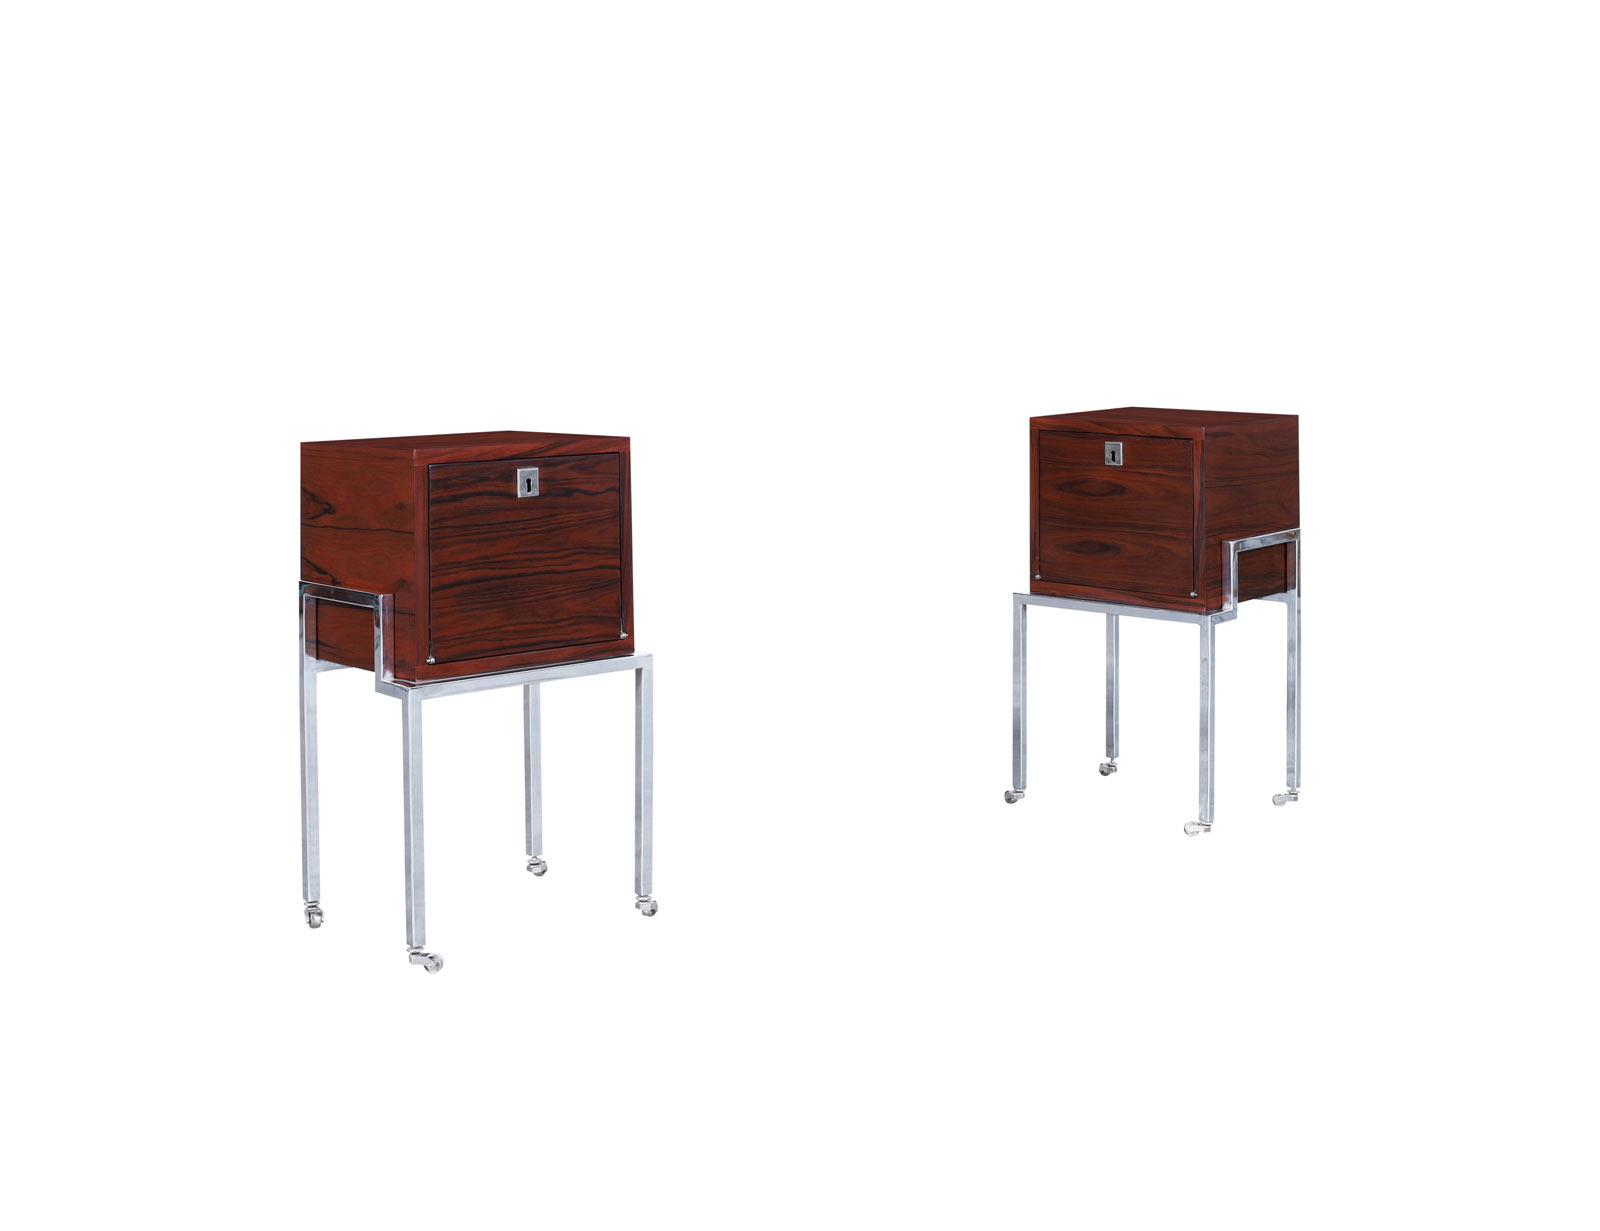 Colombian Rosewood and Chrome End Tables or Nightstands